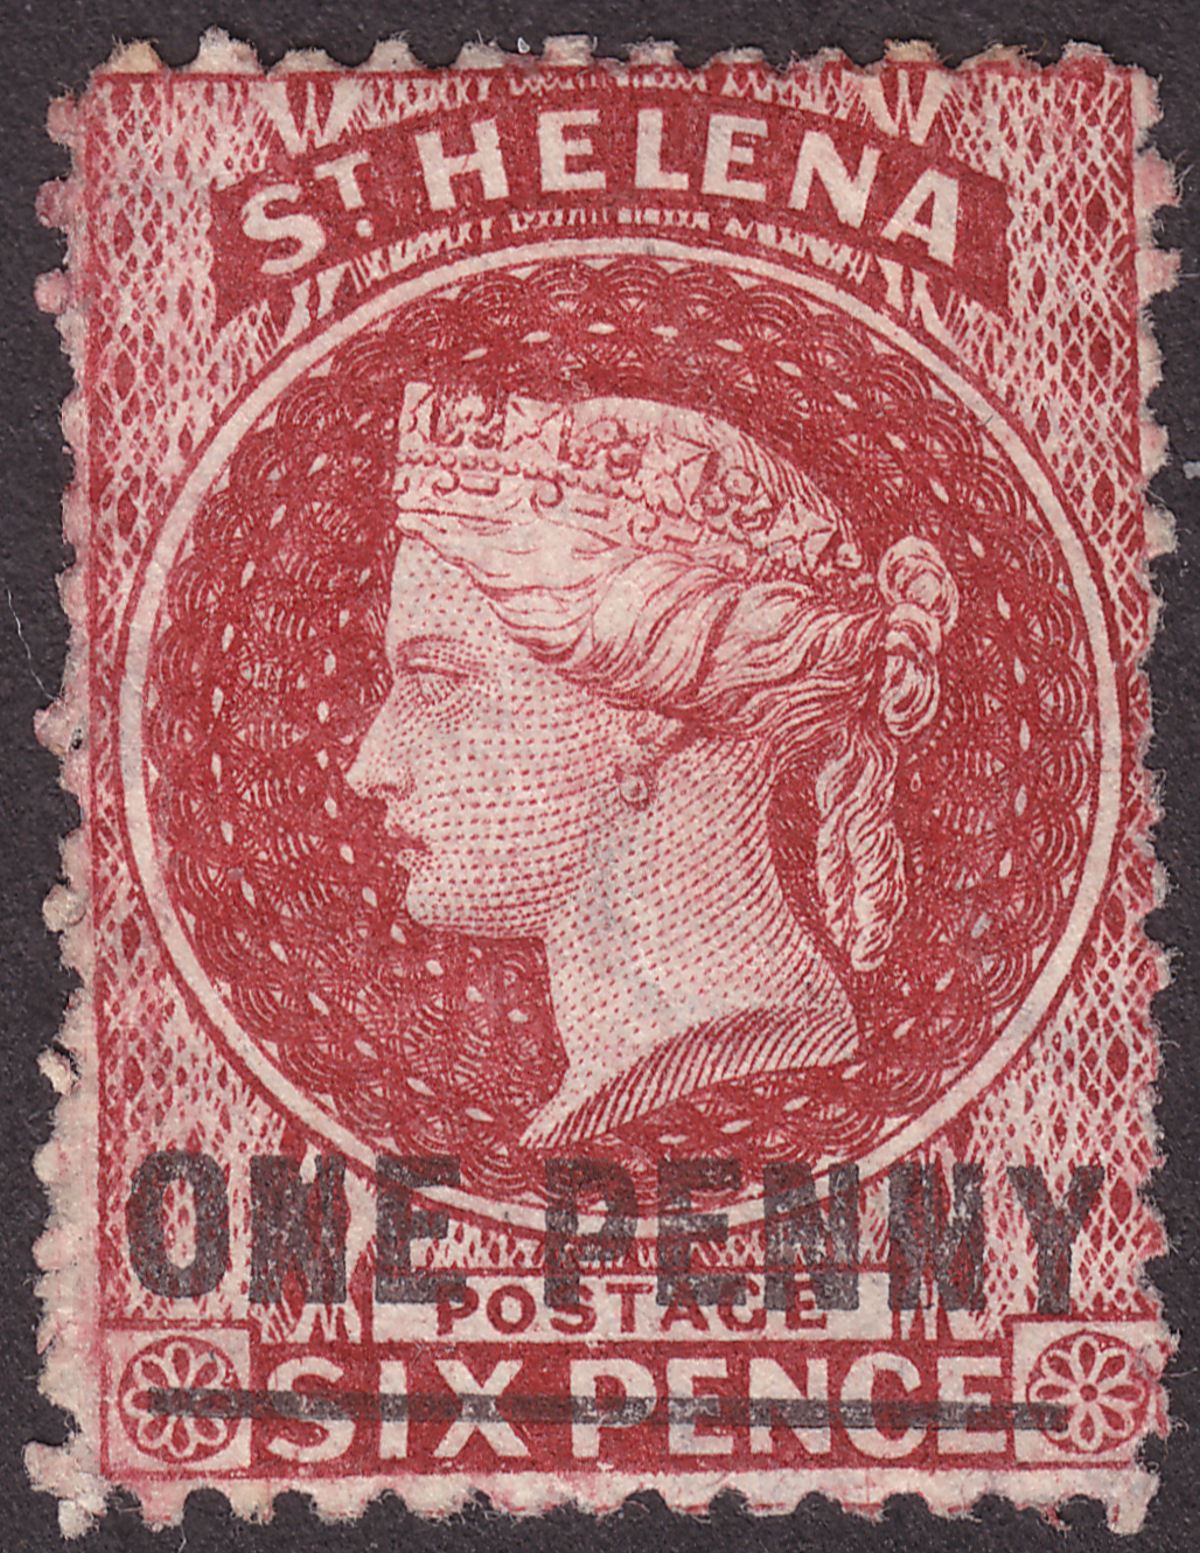 St Helena 1864 QV 1d Lake type A perf 12½ Unused SG6 cat £70 as mint